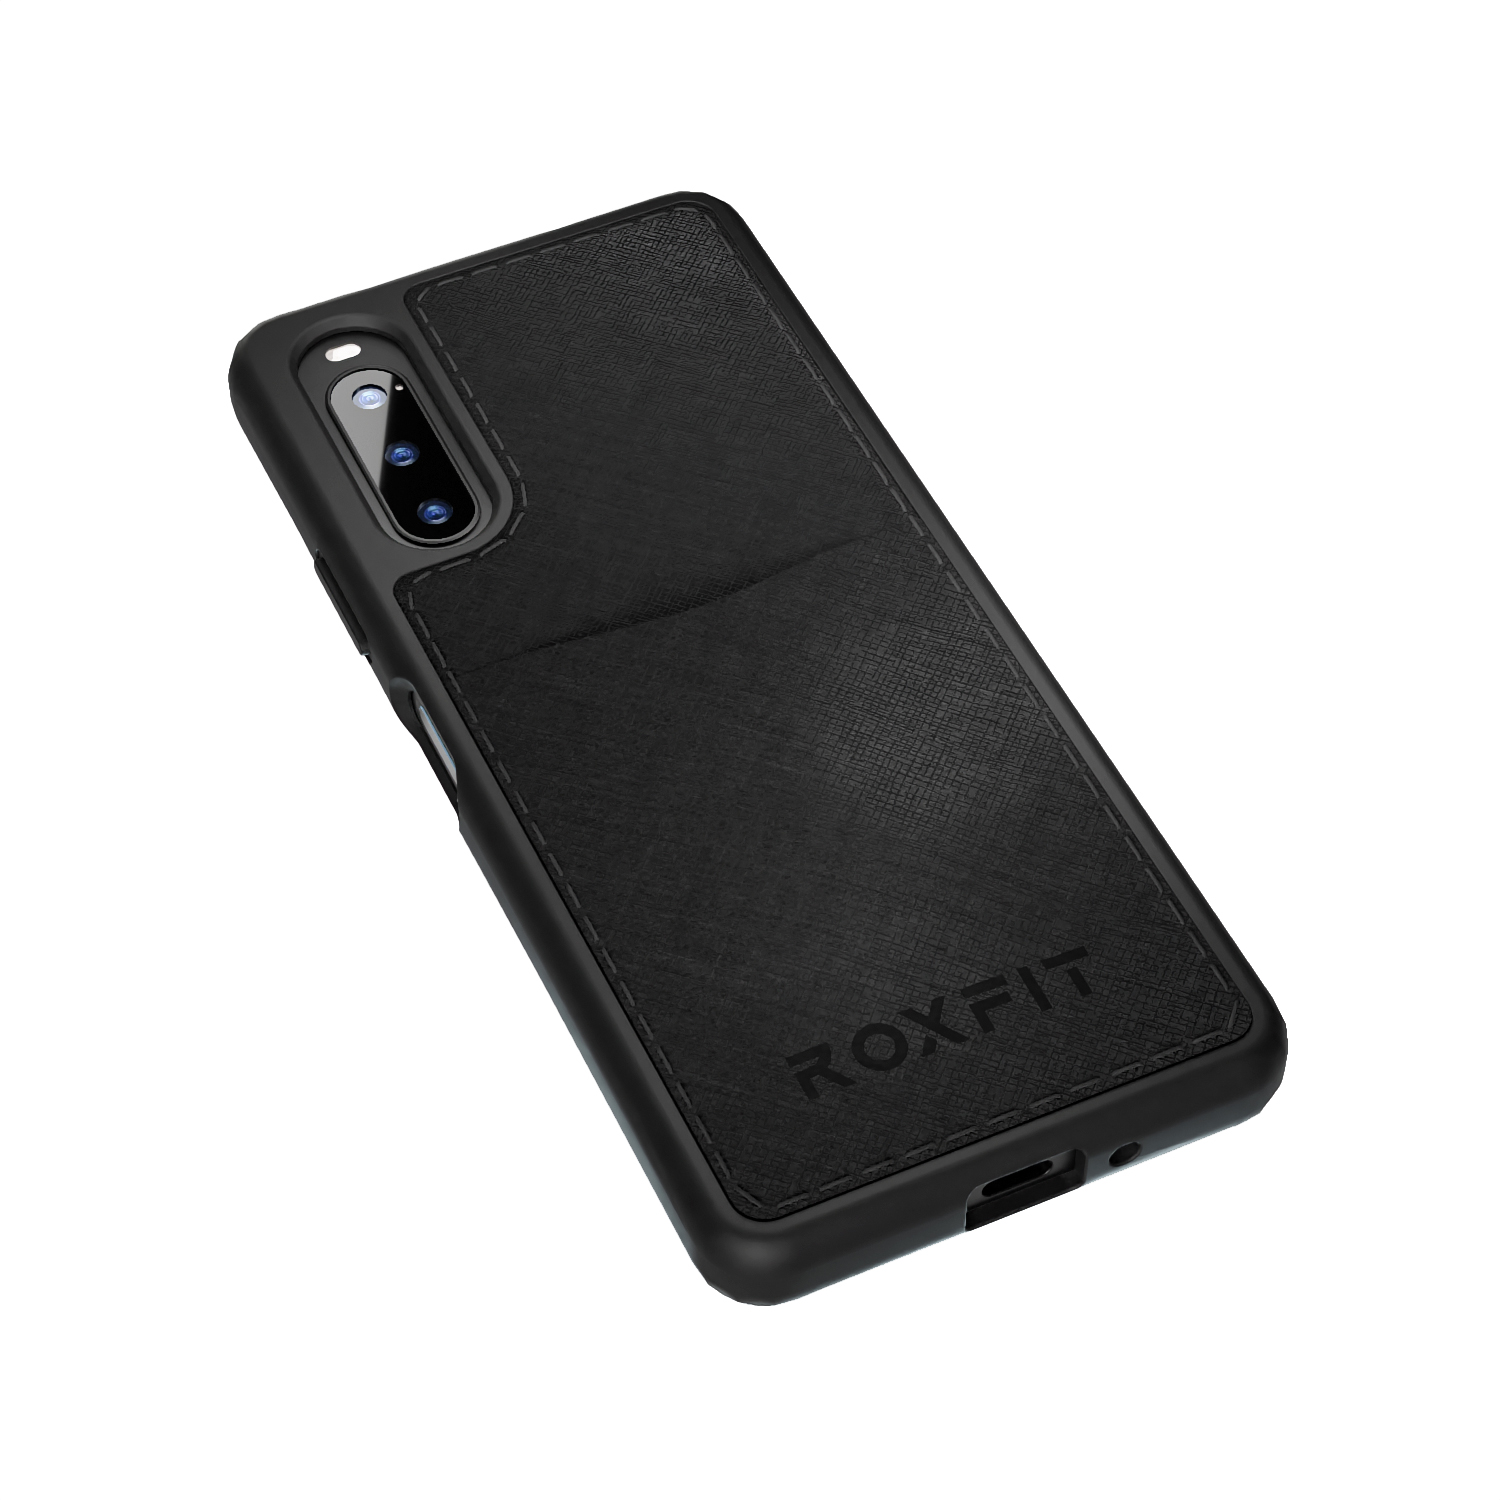 Roxfit Pocket Case with Tempered Glass for Sony Xperia 10 IV (Black), , large image number 1